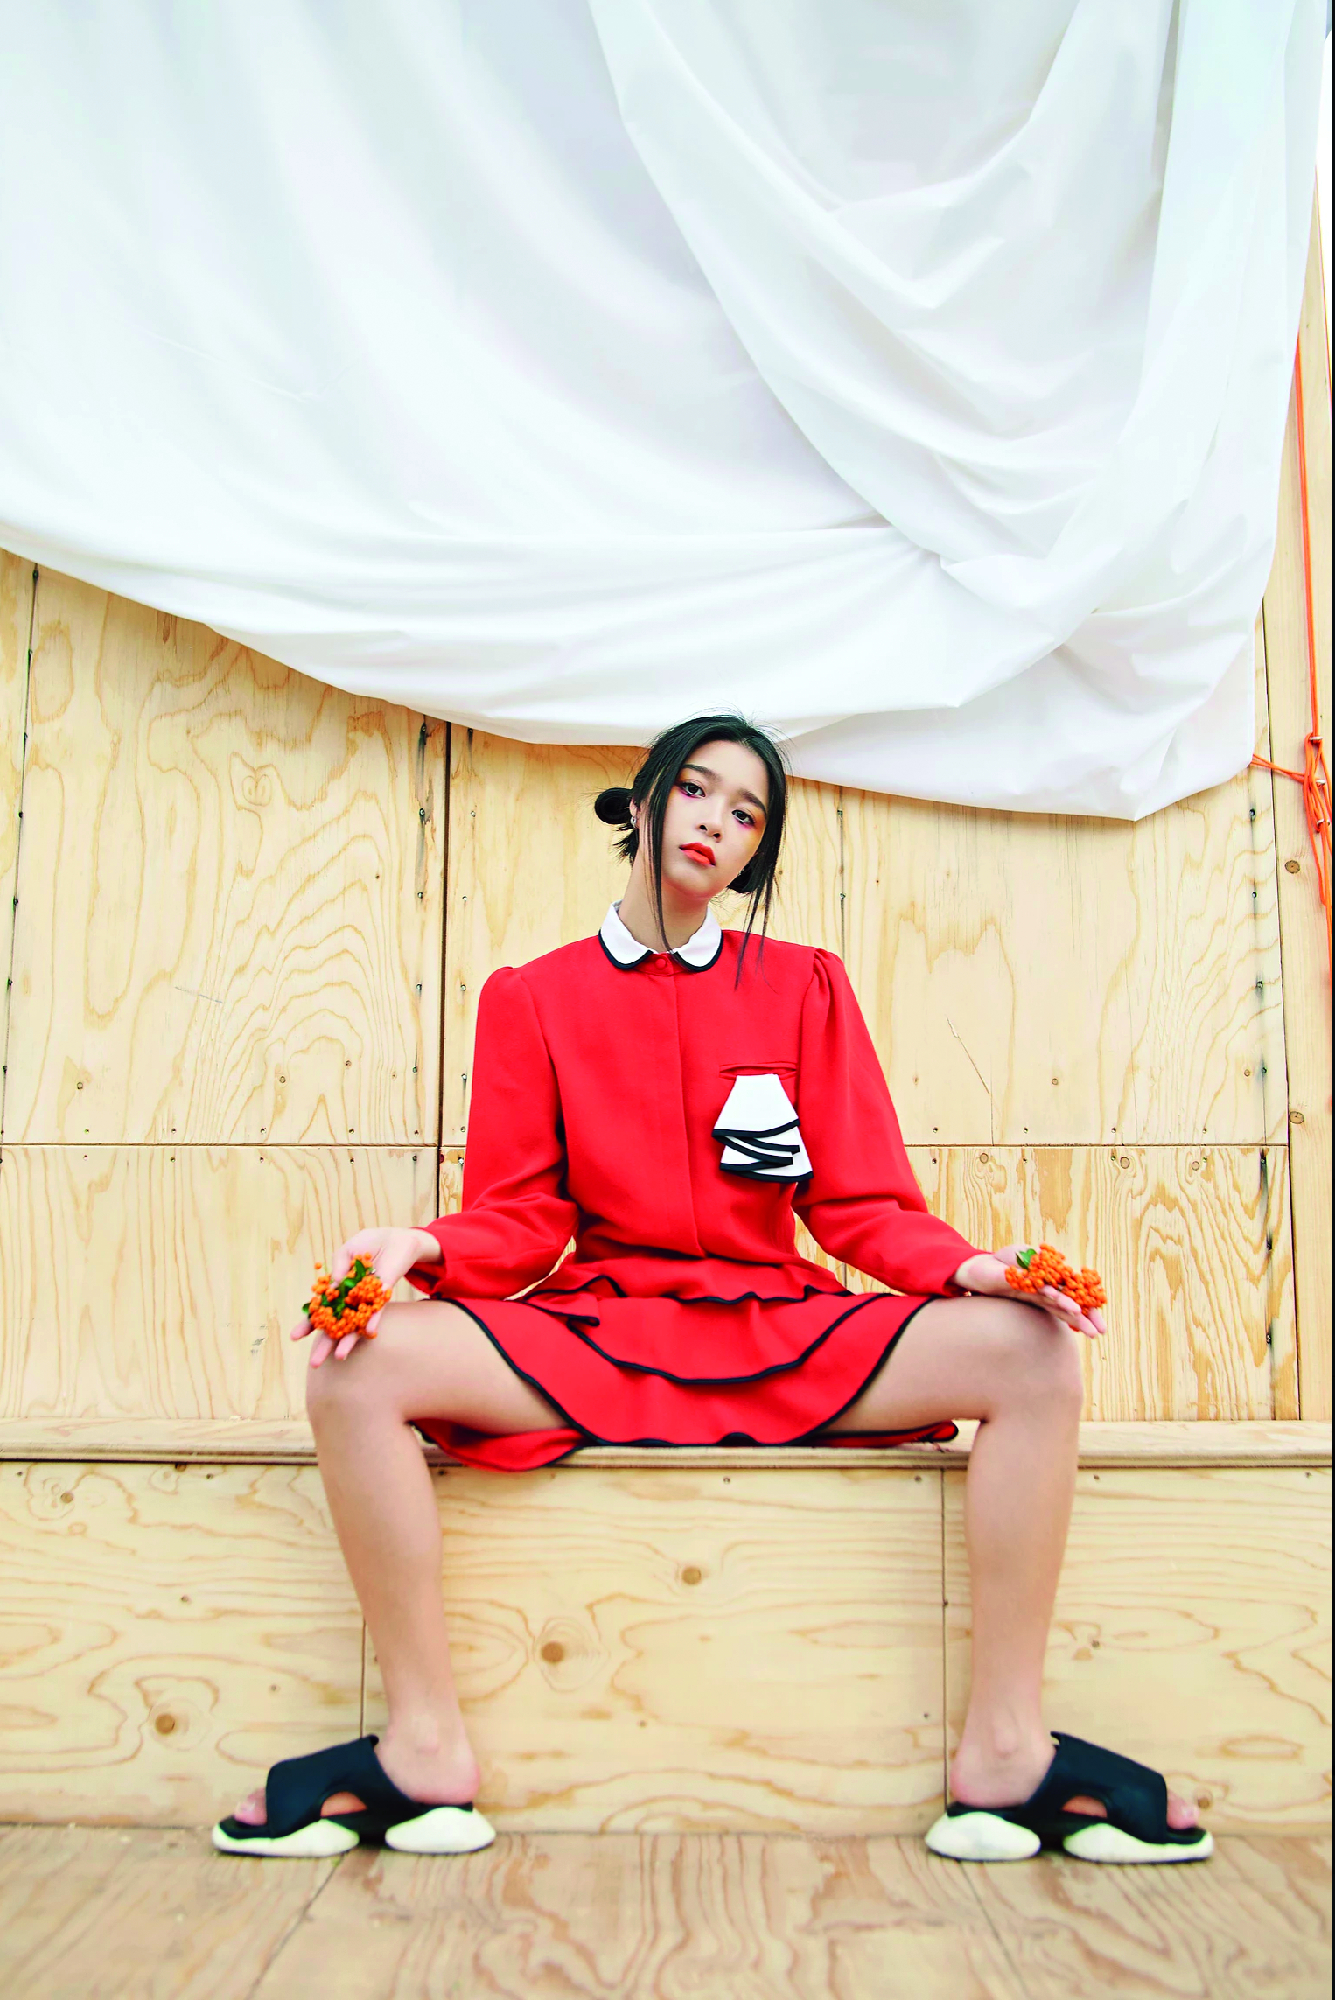 Female model wearing red top and skirt